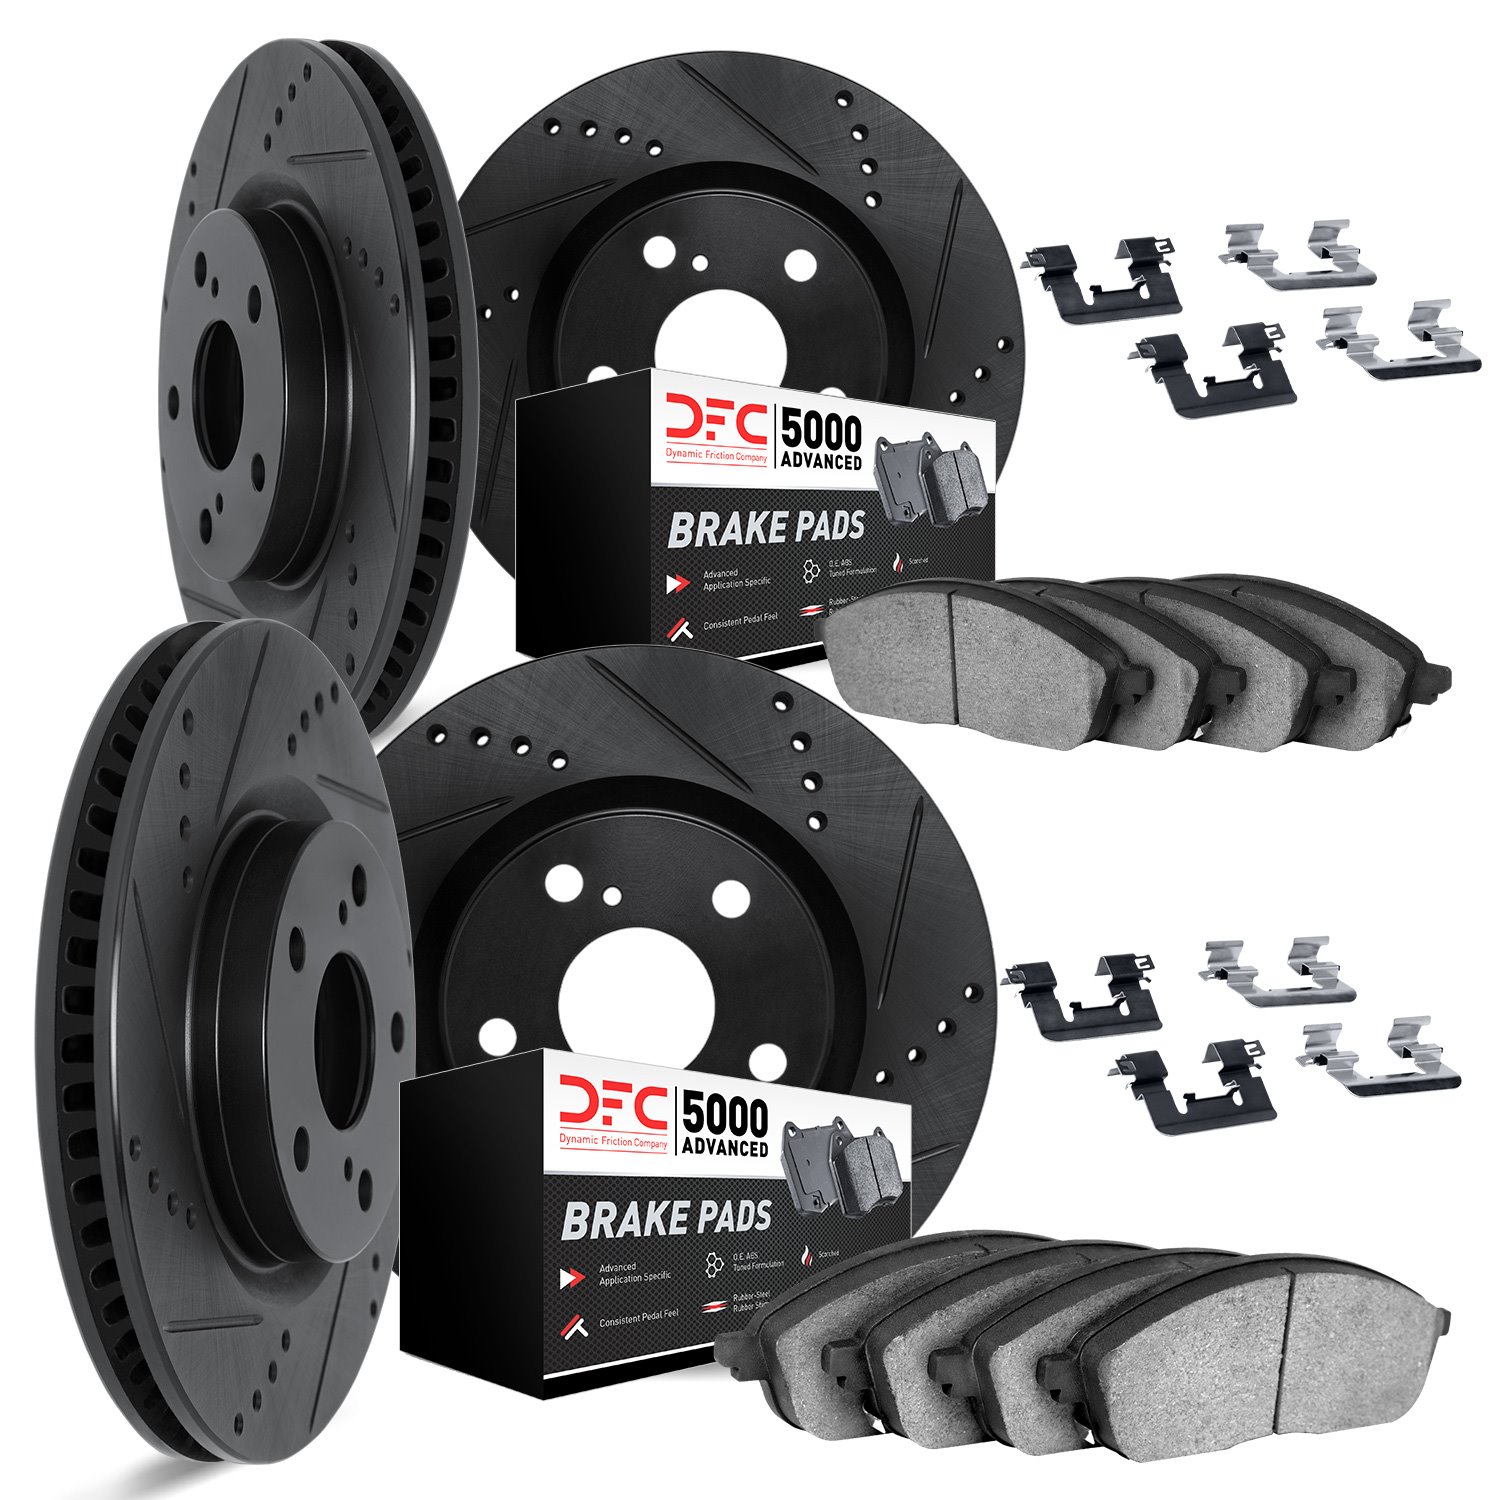 8514-31059 Drilled/Slotted Brake Rotors w/5000 Advanced Brake Pads Kit & Hardware [Black], 2007-2013 BMW, Position: Front and Re